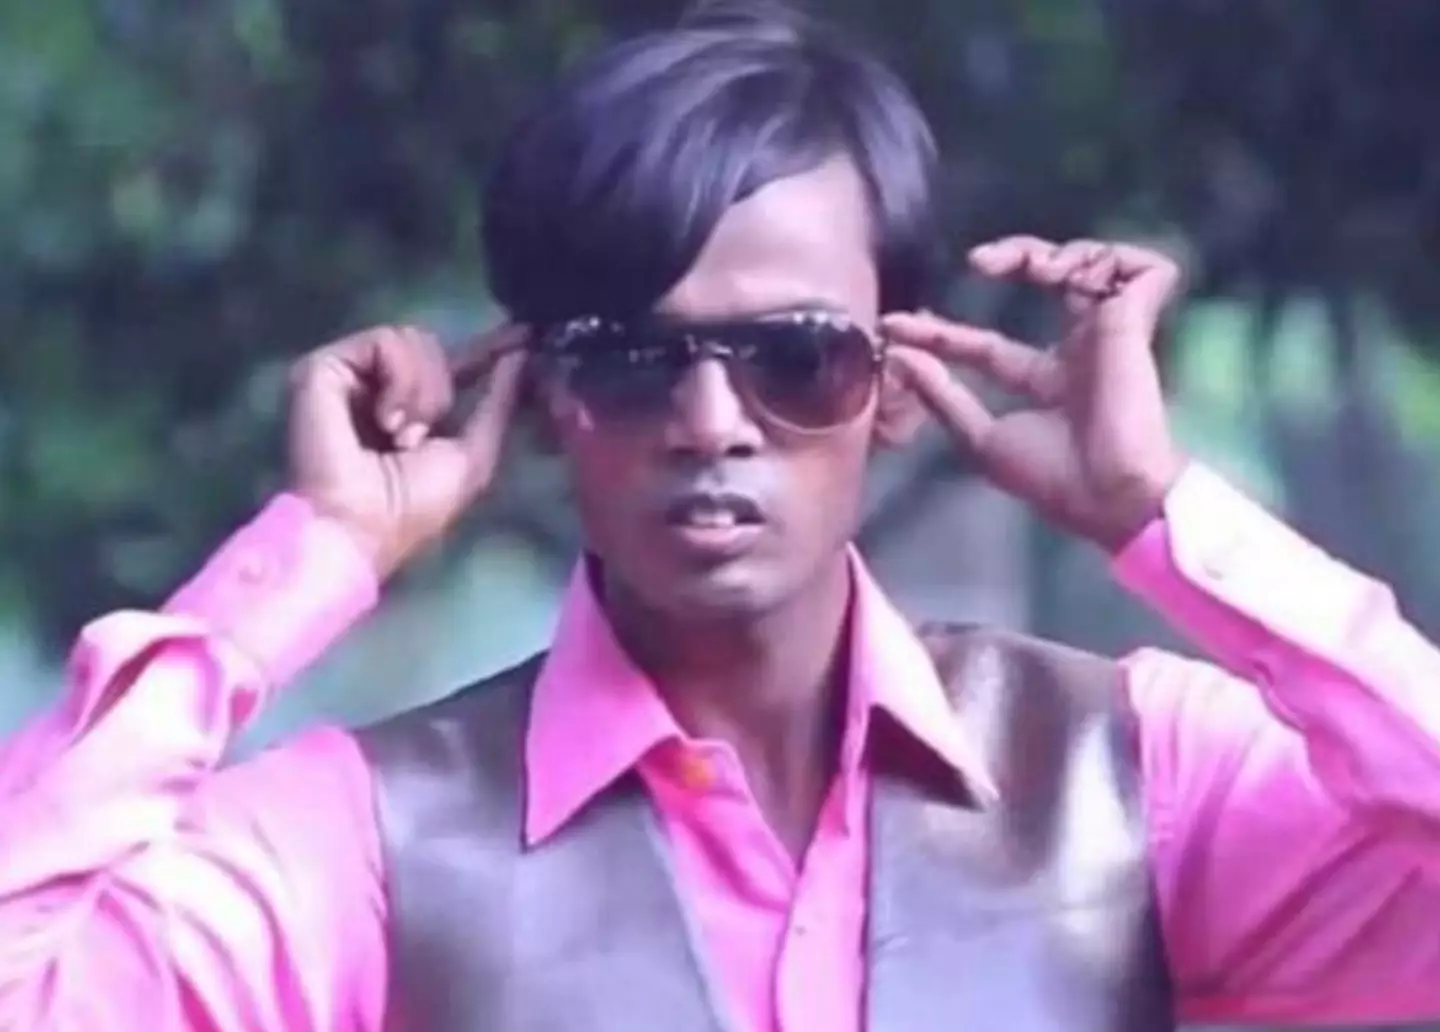 Hero Alom was arrested after singing while dressed as a police officer.